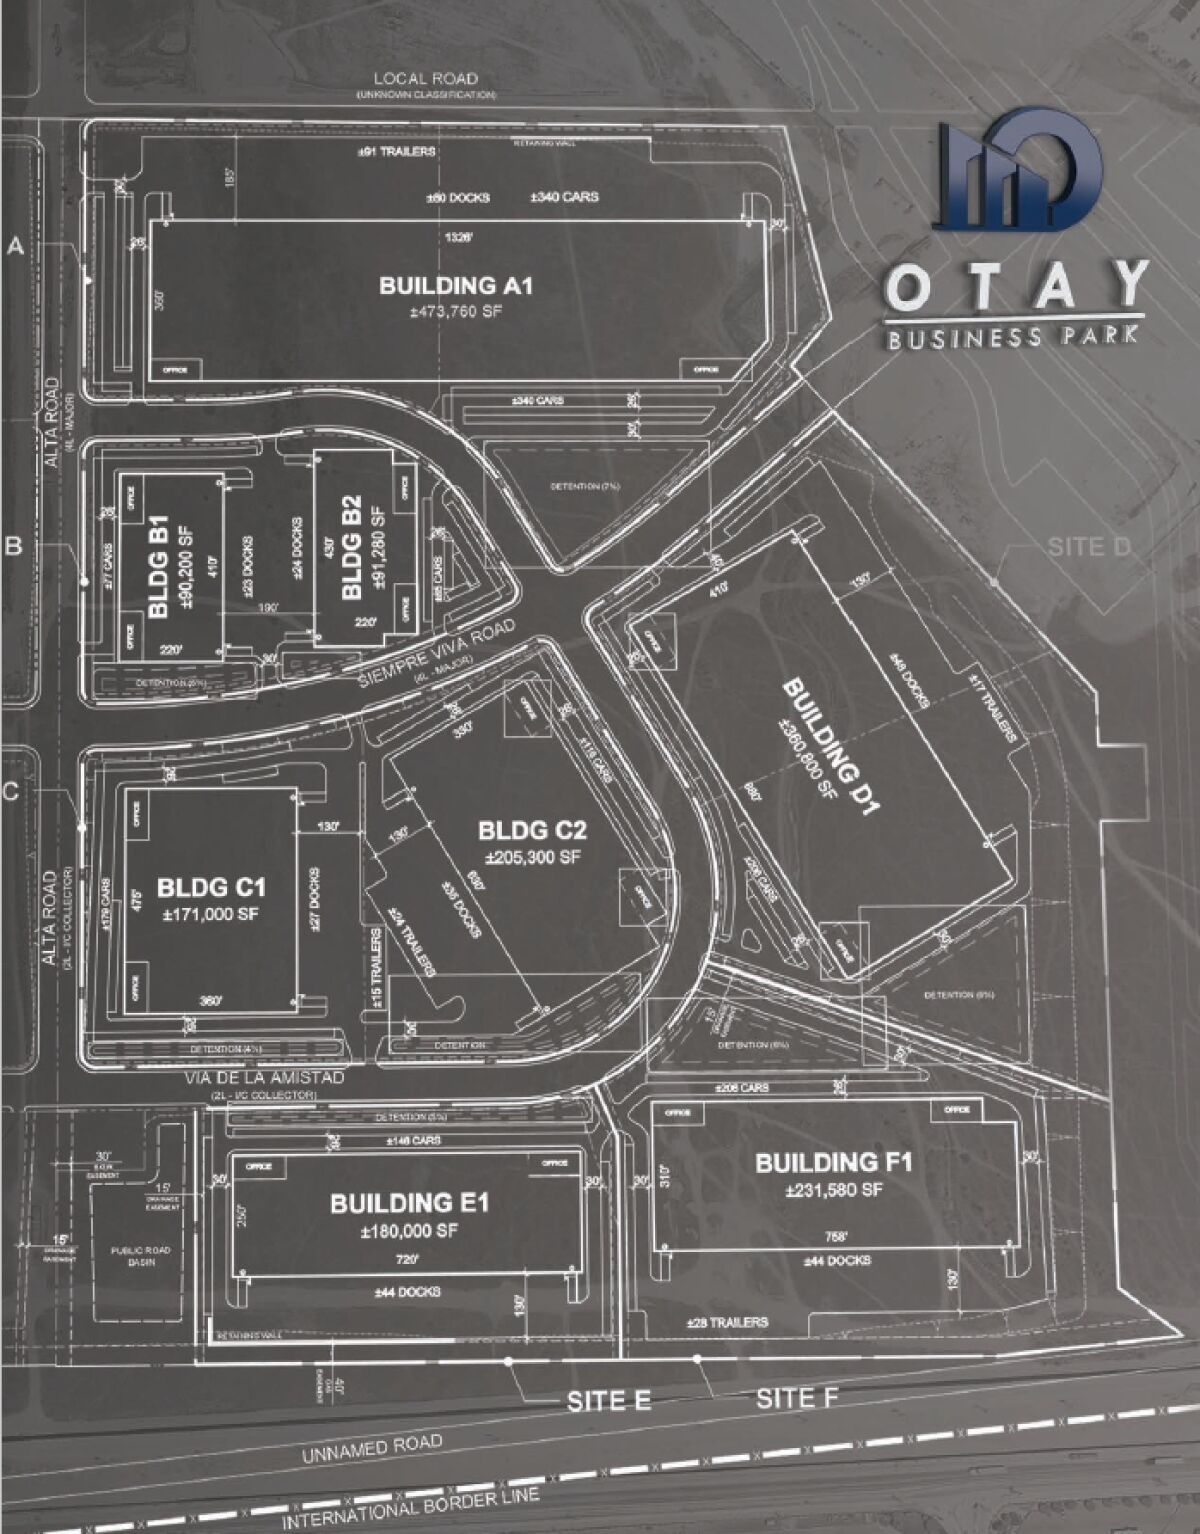 The Otay Business Park will have 1.8-million-square-feet of industrial space in Otay Mesa.